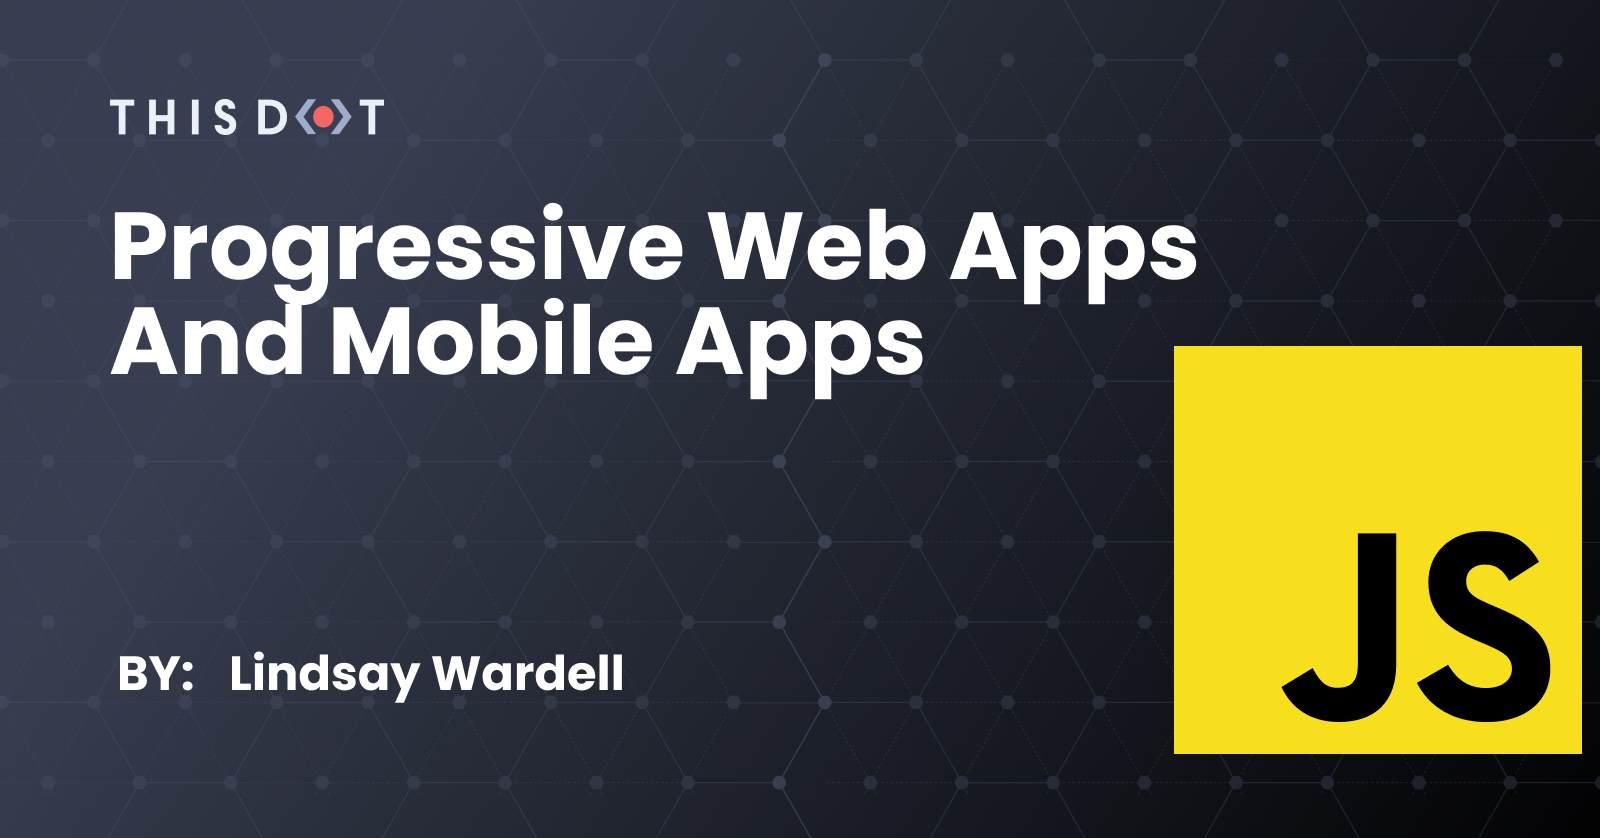 Progressive Web Apps and Mobile Apps